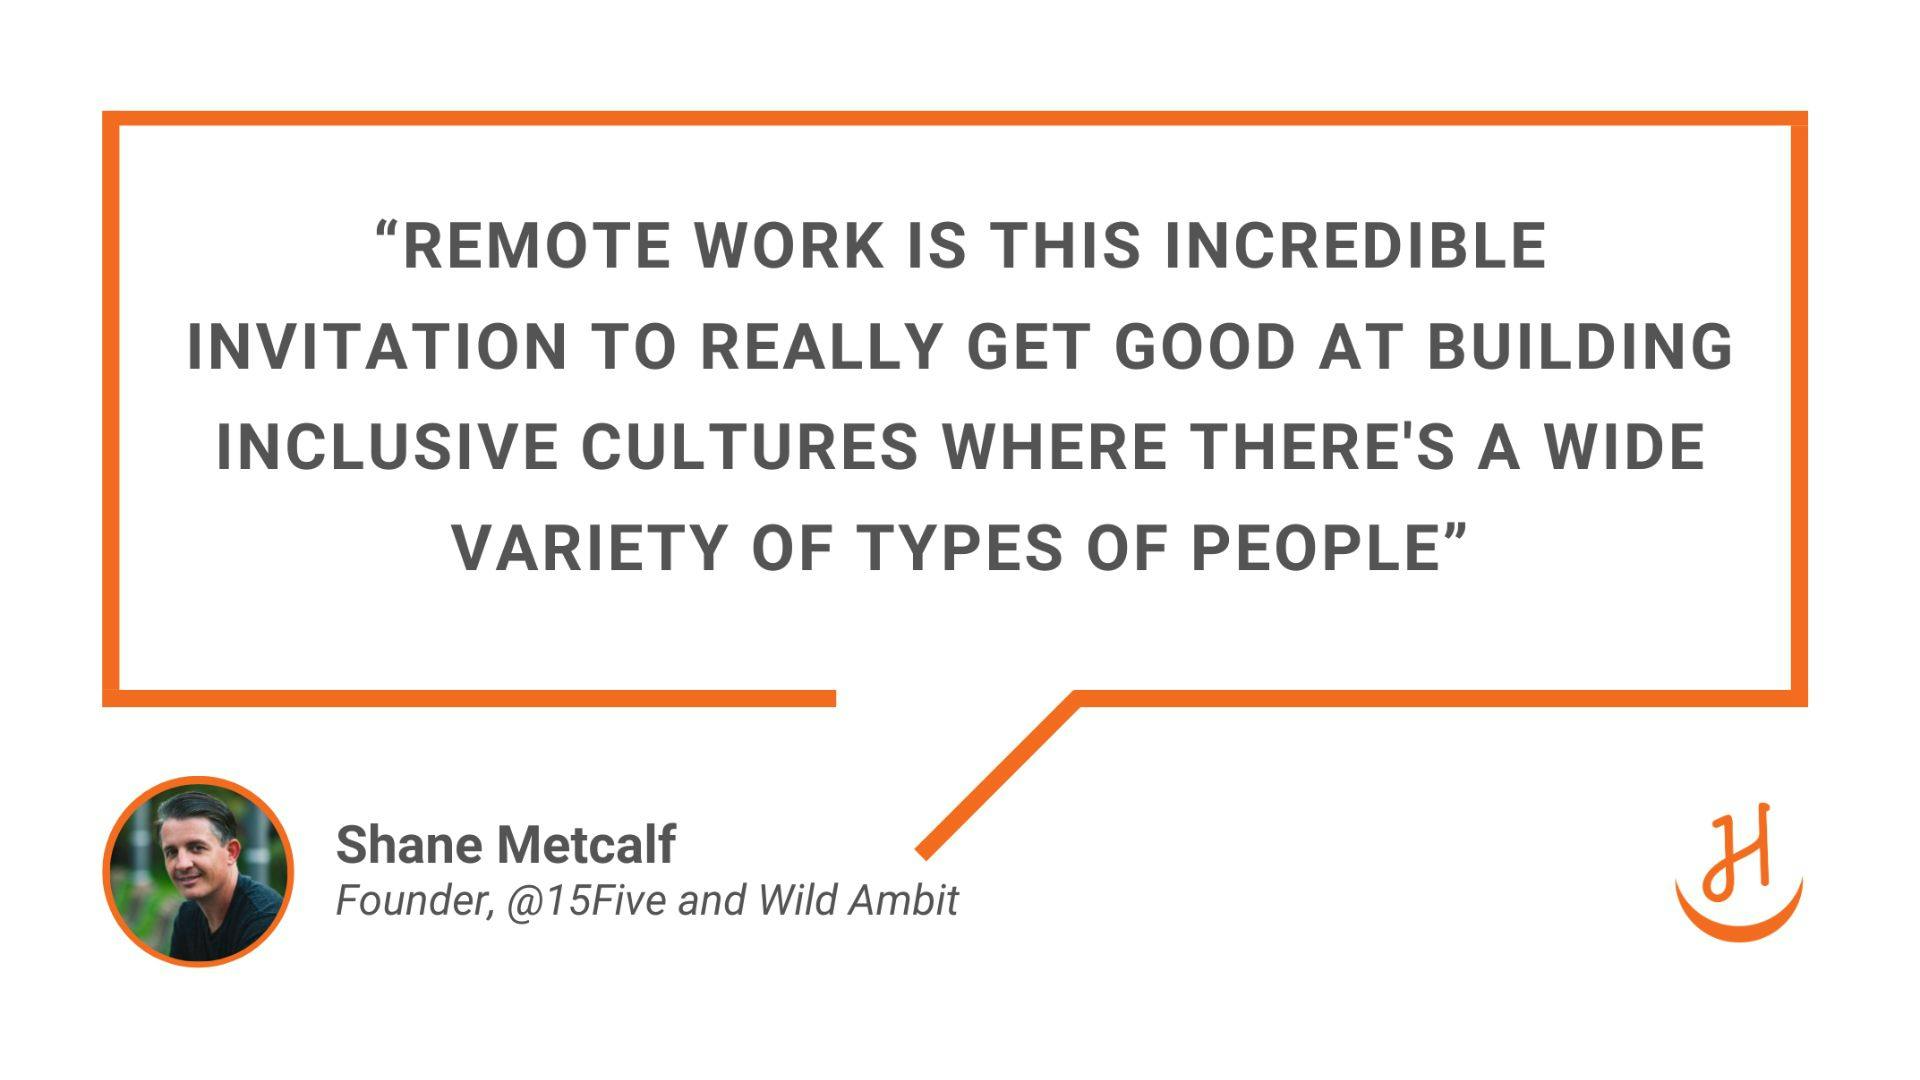 “Remote work is this incredible invitation to really get good at building inclusive cultures where there's a wide variety of types of people”. Quote by Shane Metcalf, Founder, @15Five and Wild Ambit